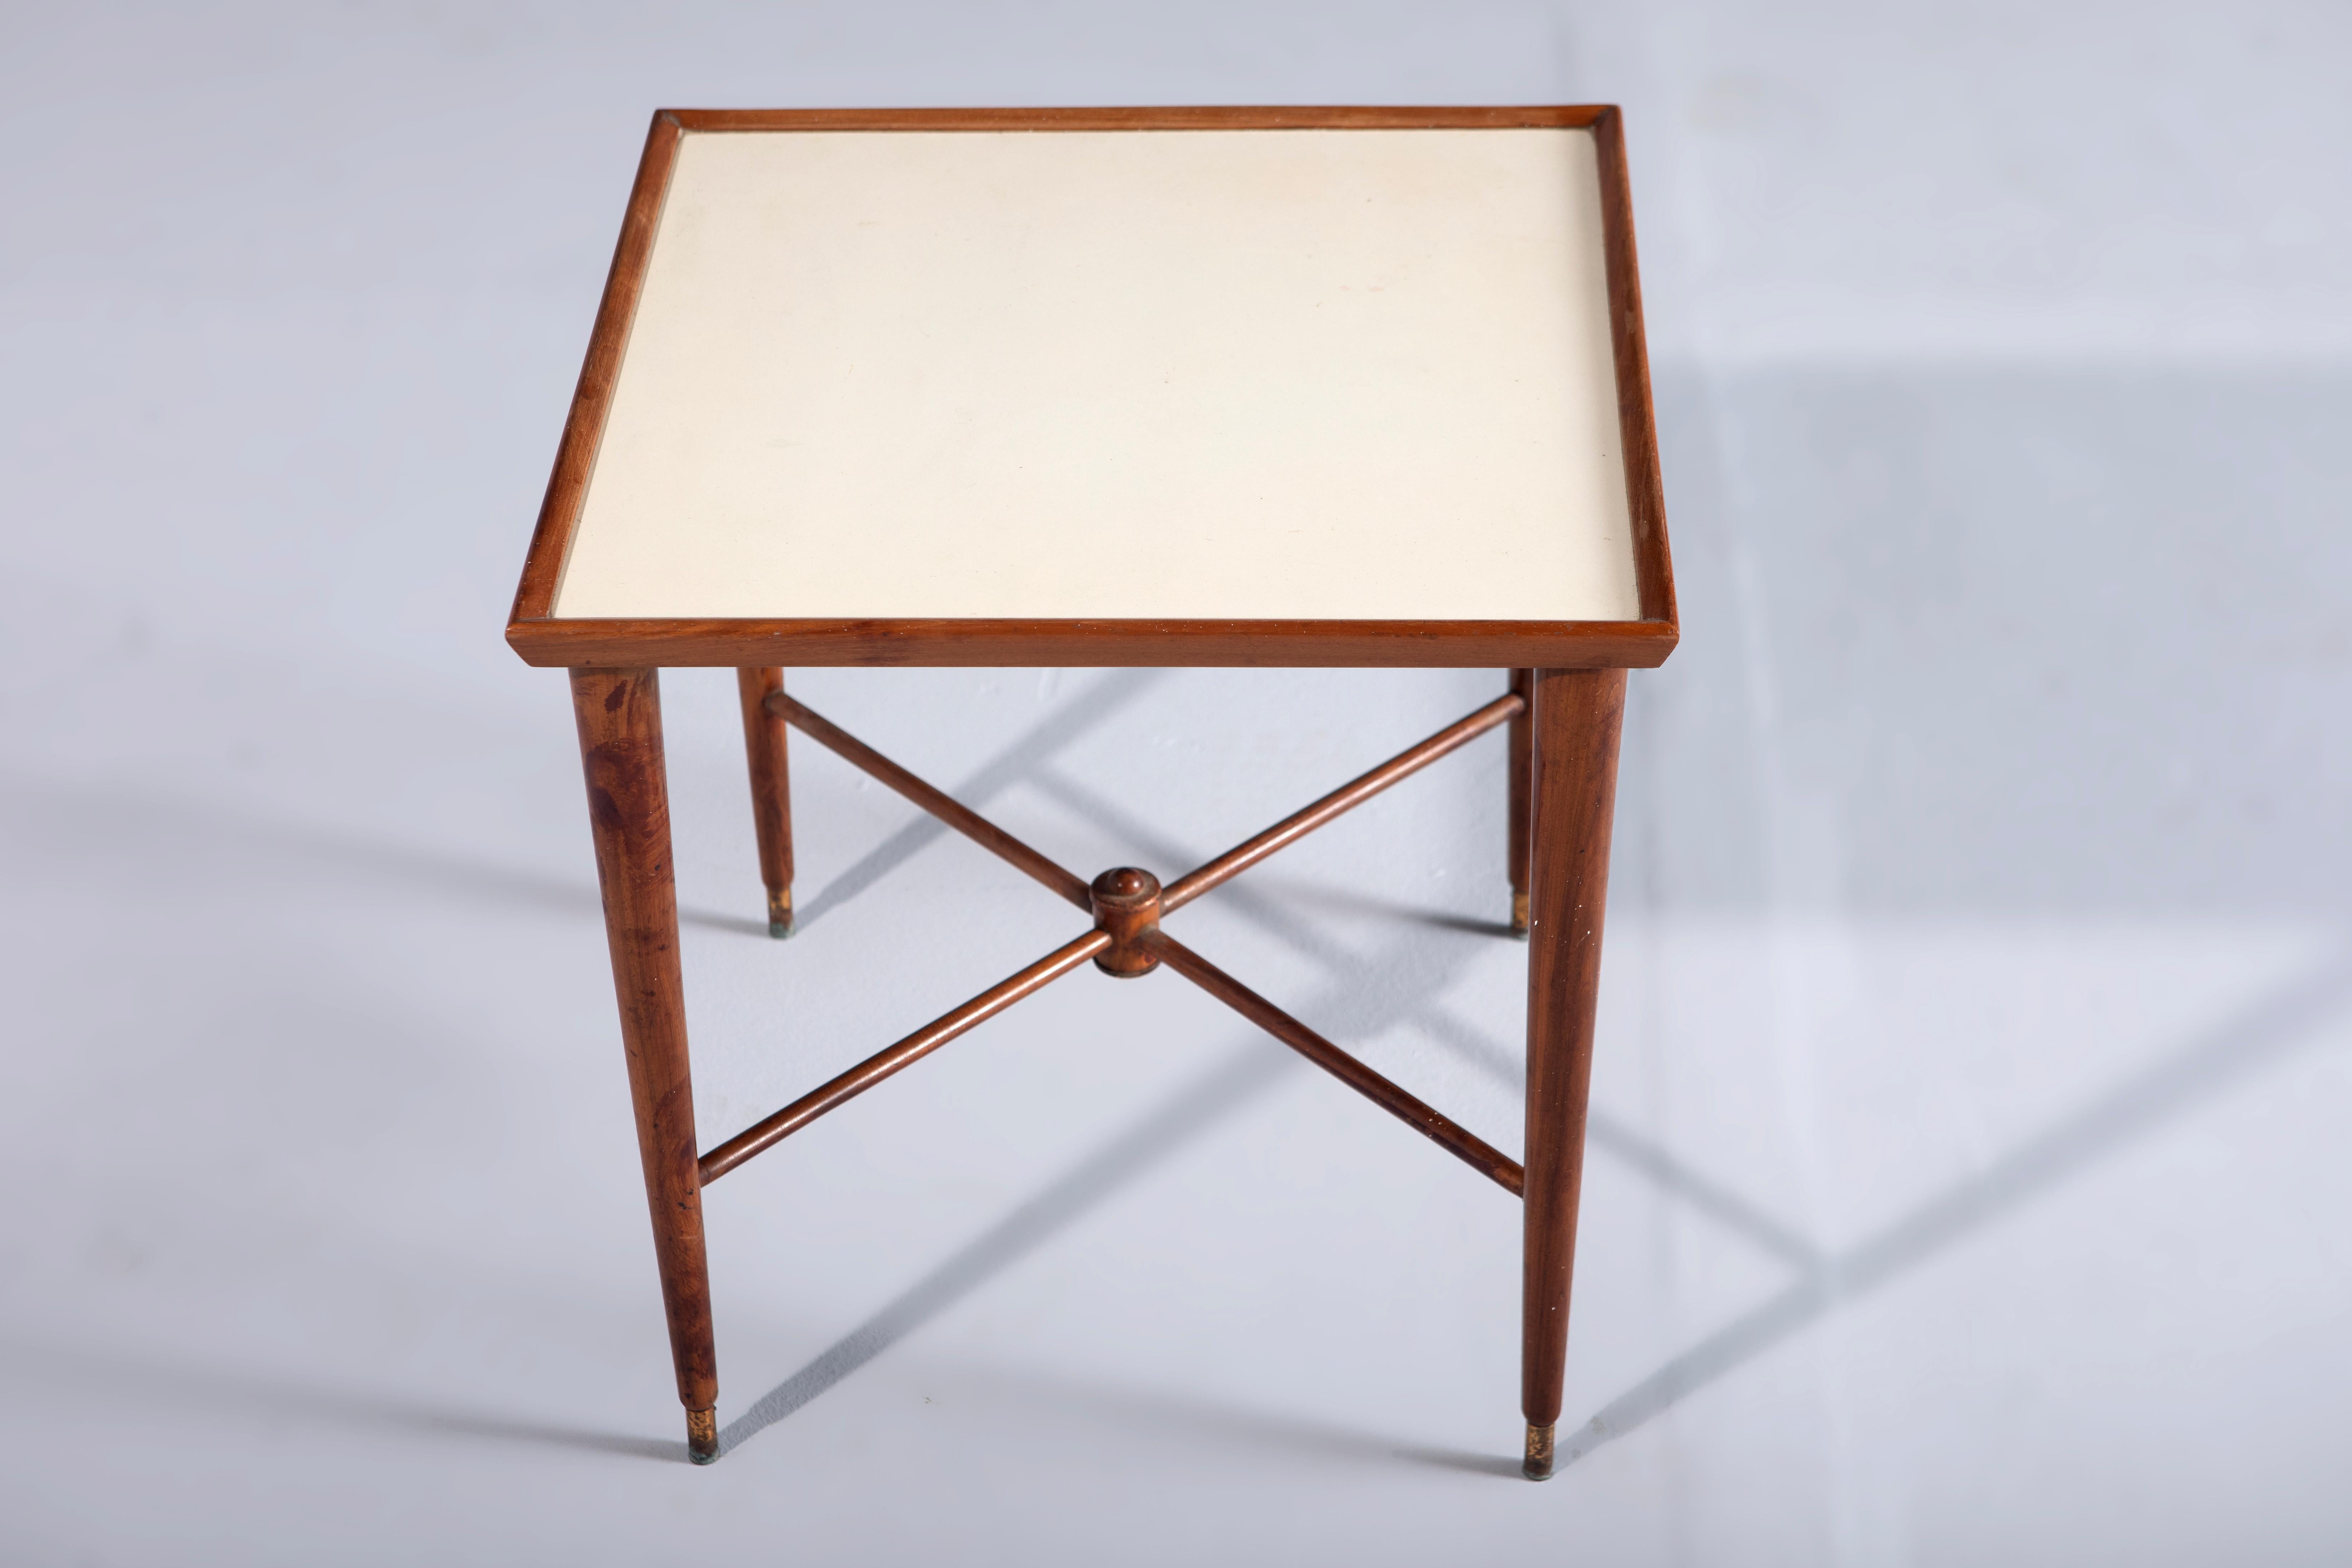 Mid-Century Modern Side Table by Móveis Cavallaro, Brazil, 1960s

Side table with solid wood structure and Formica top.
The table has an X shaped support on the legs, with solid wood accents.